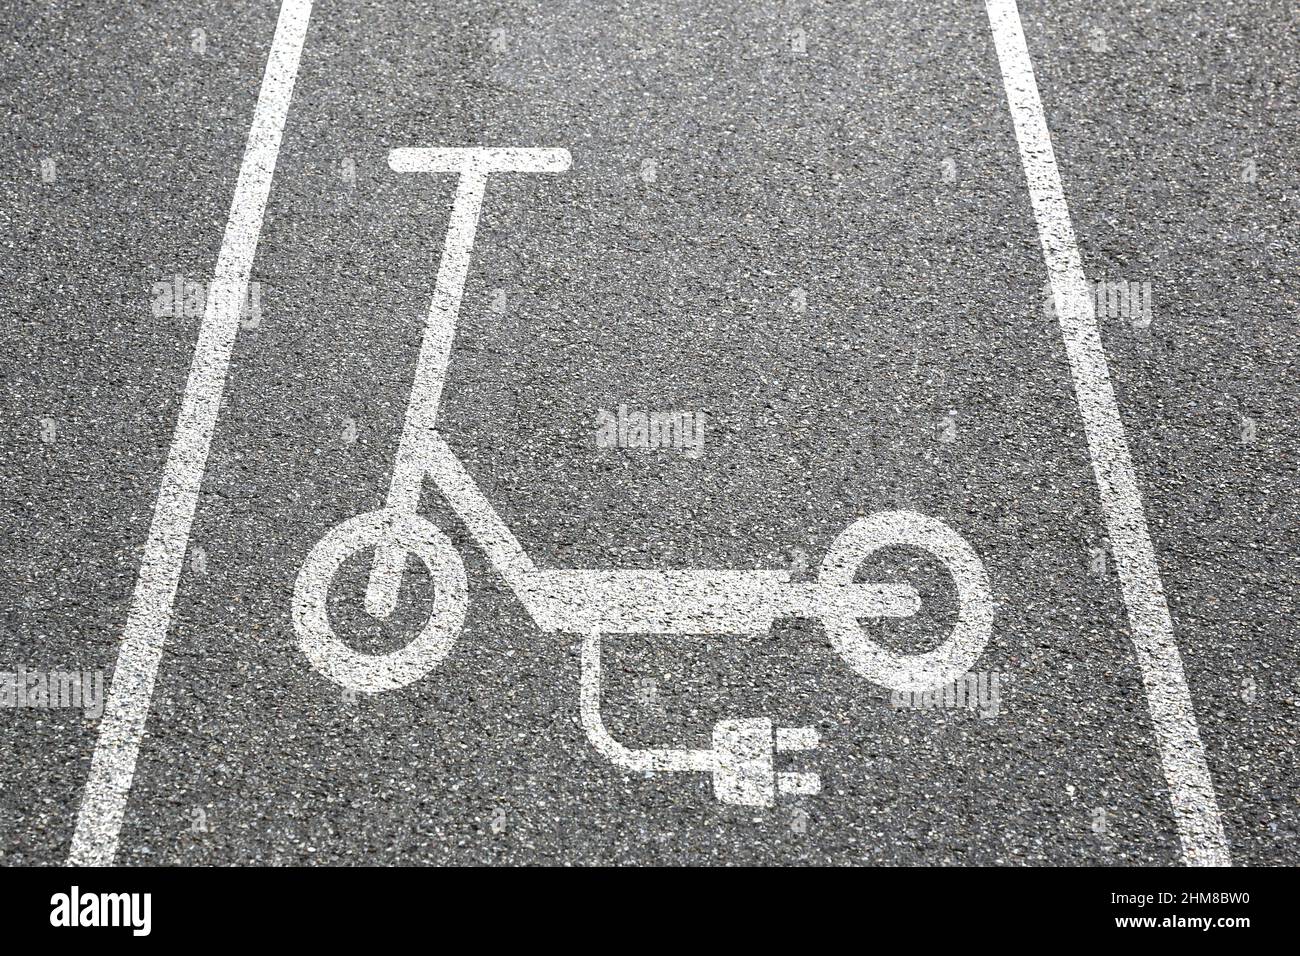 Electric scooter e-scooter lane path way road sign eco friendly mobility transport Stock Photo